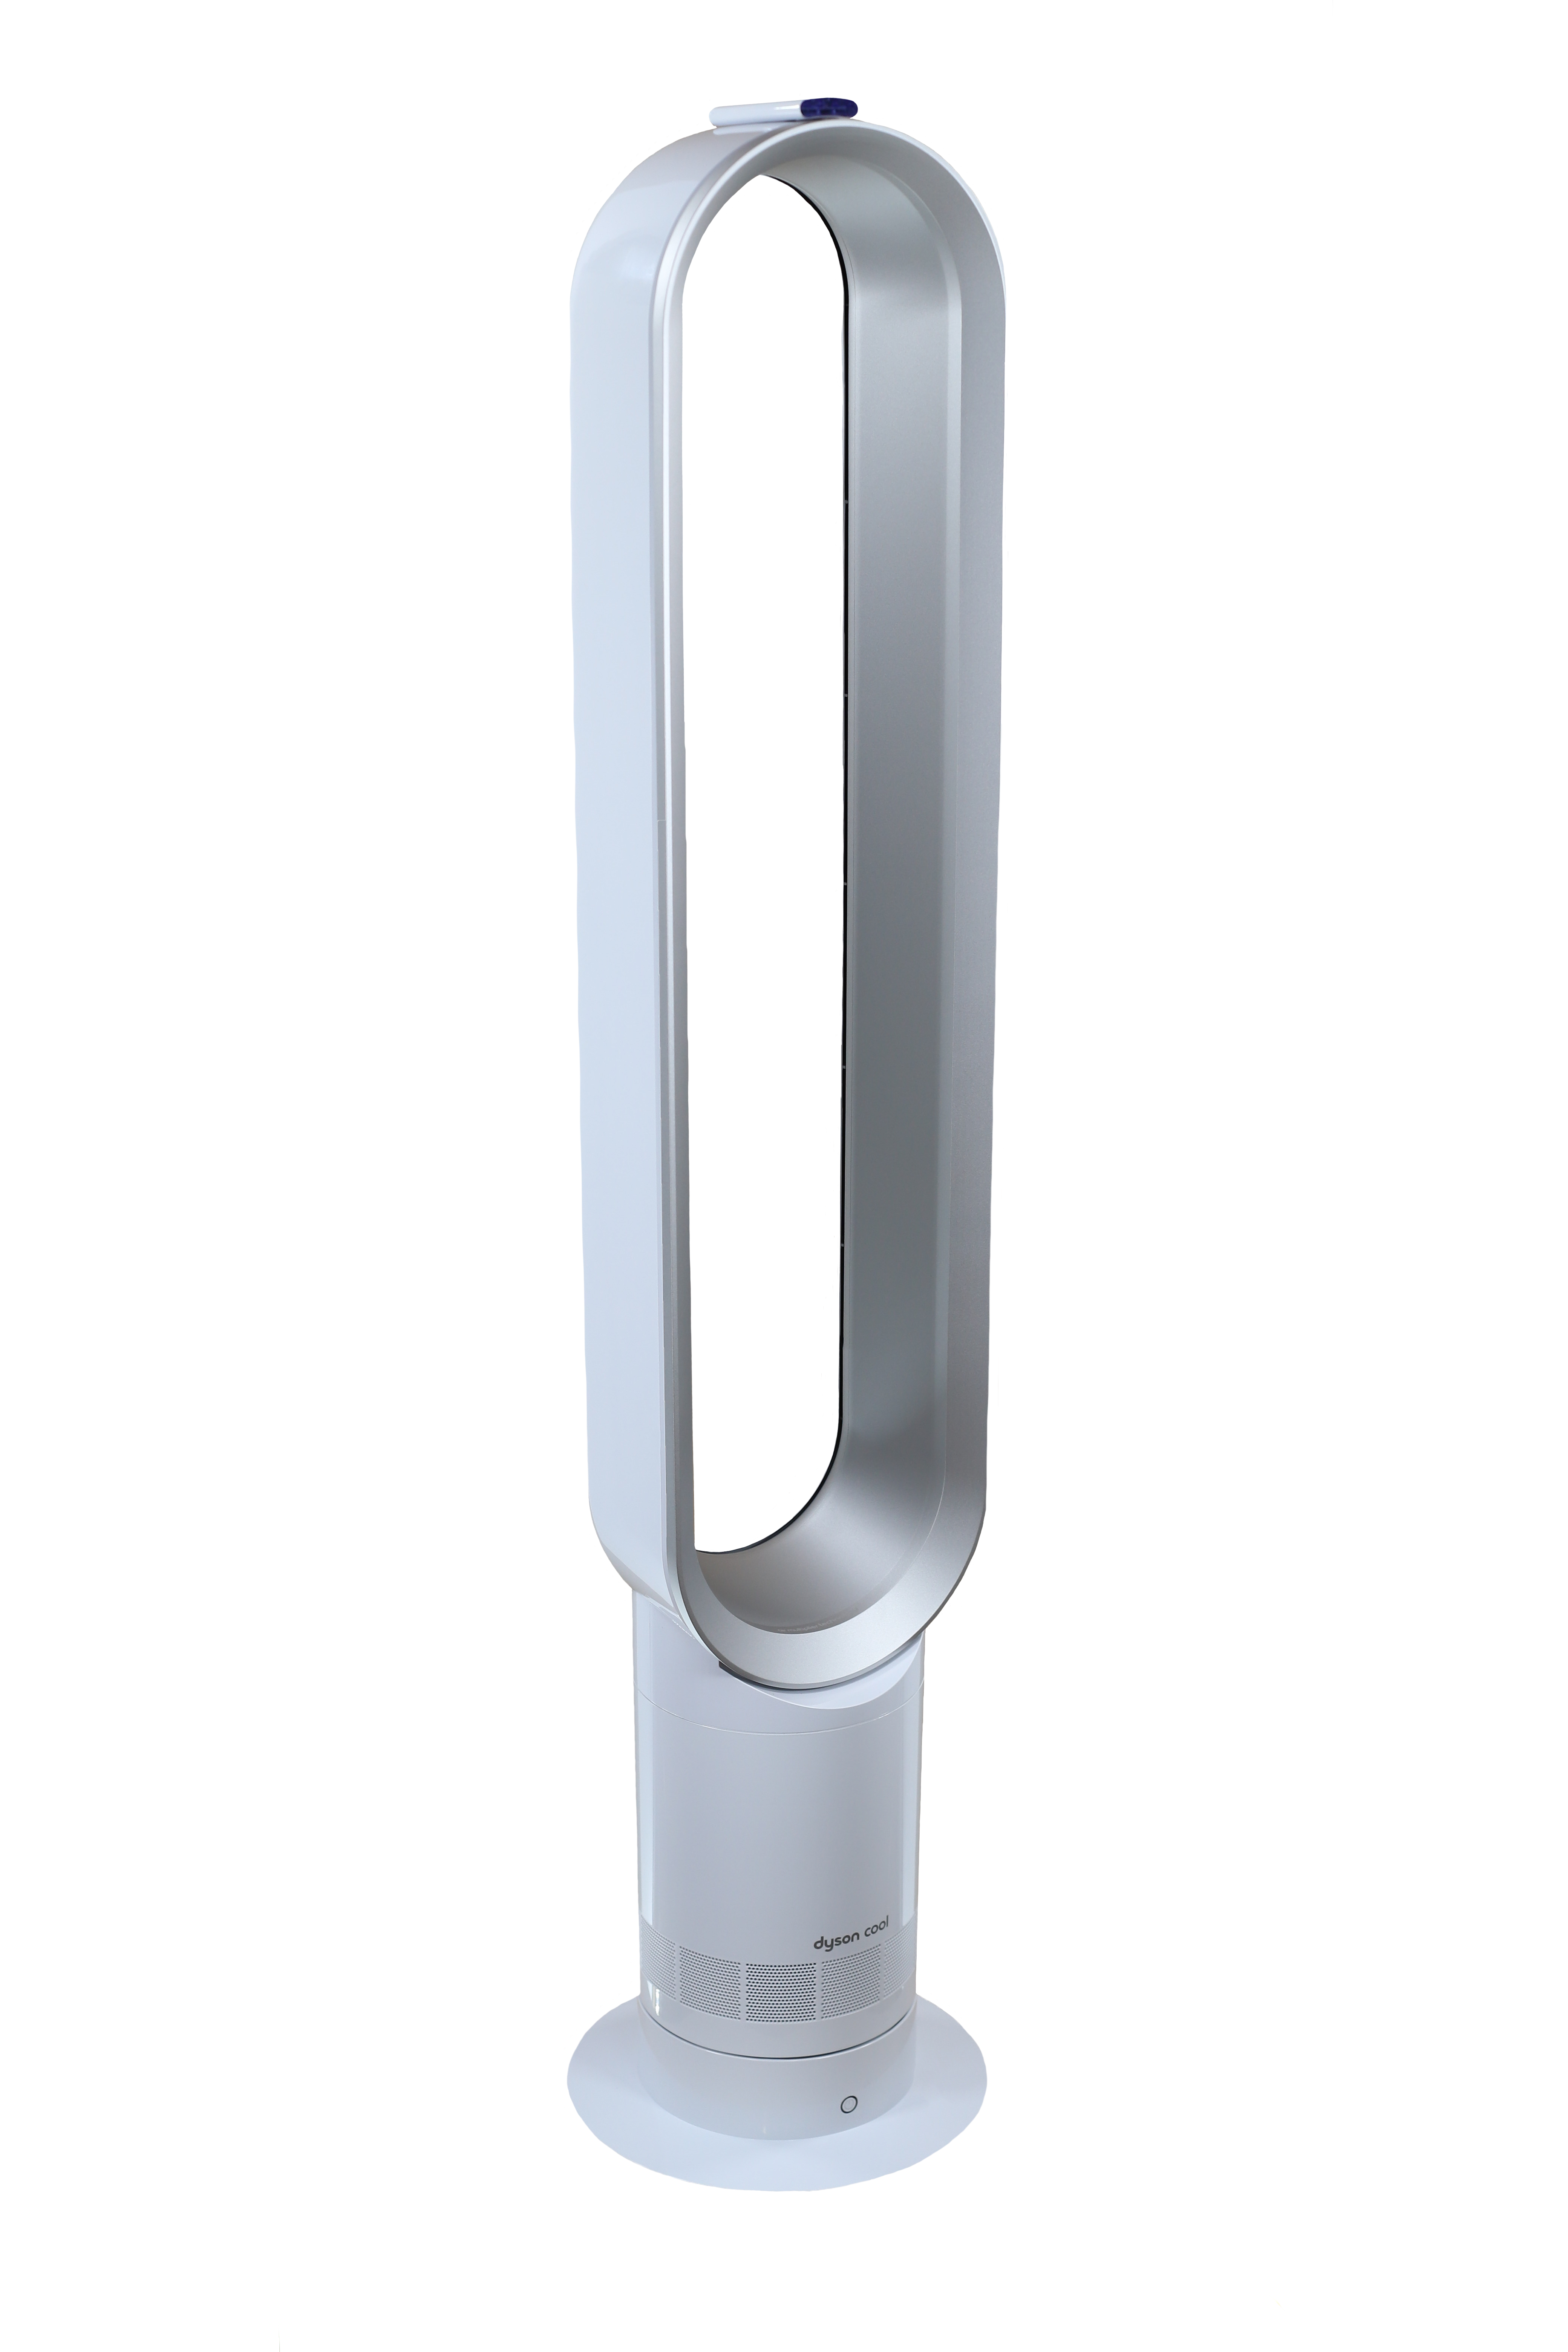 Rent Dyson Cool Tower Fan AM07 from €12.90 per month